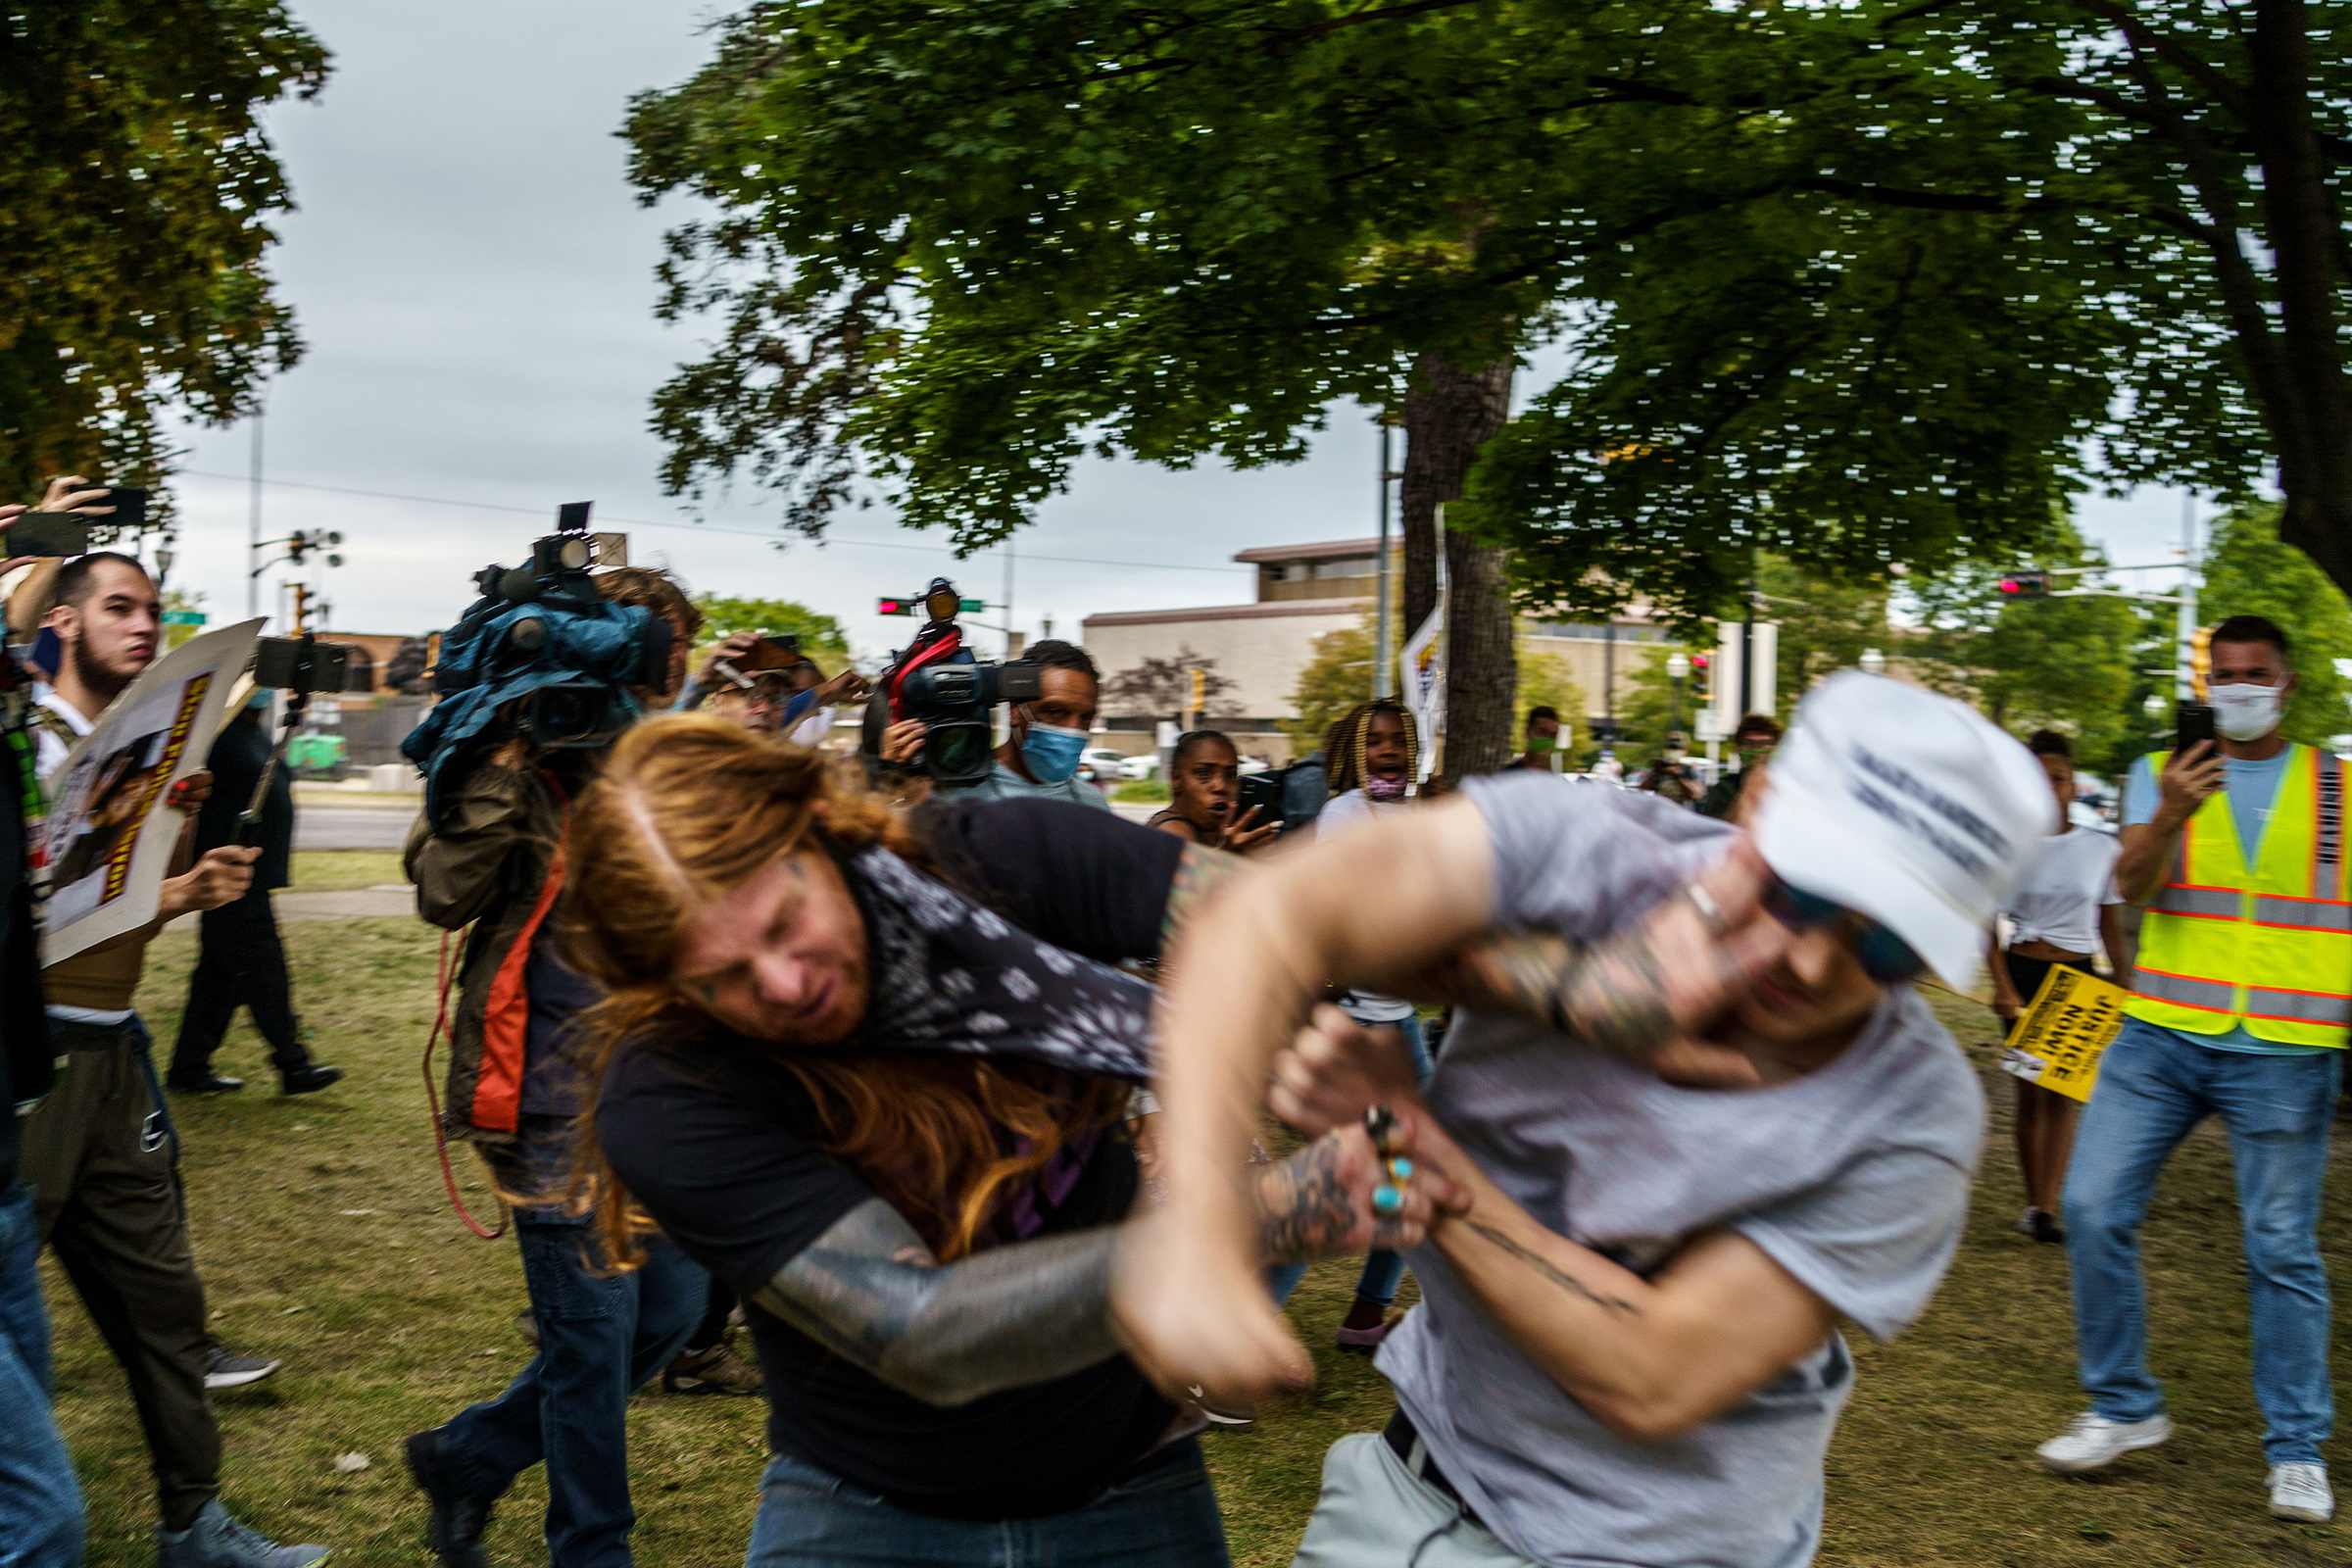 A protester scuffles with a Trump supporter (R) in Kenosha, Wis. on Sept. 1 amid ongoing demonstrations after the shooting by police of Jacob Blake (Kerem Yucel—AFP/Getty Images)